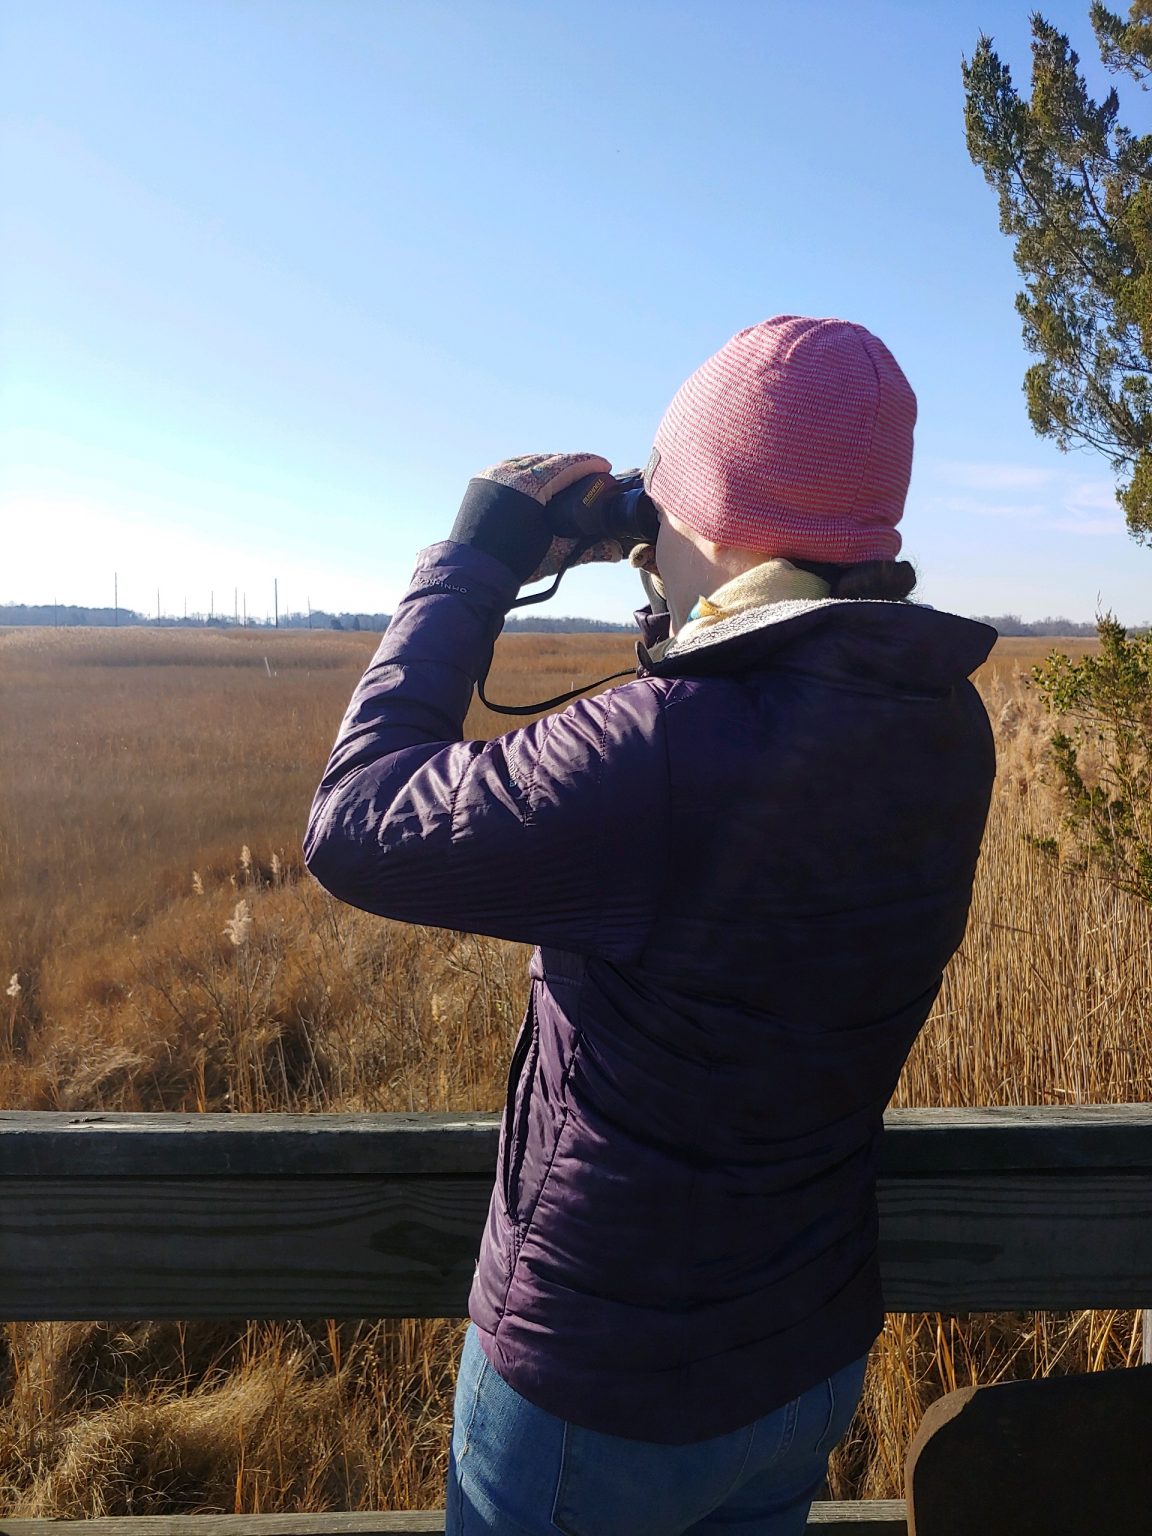 A woman in a winter coat, hat and gloves, seen from behind, is looking out across a wetland area through a pair of binoculars.